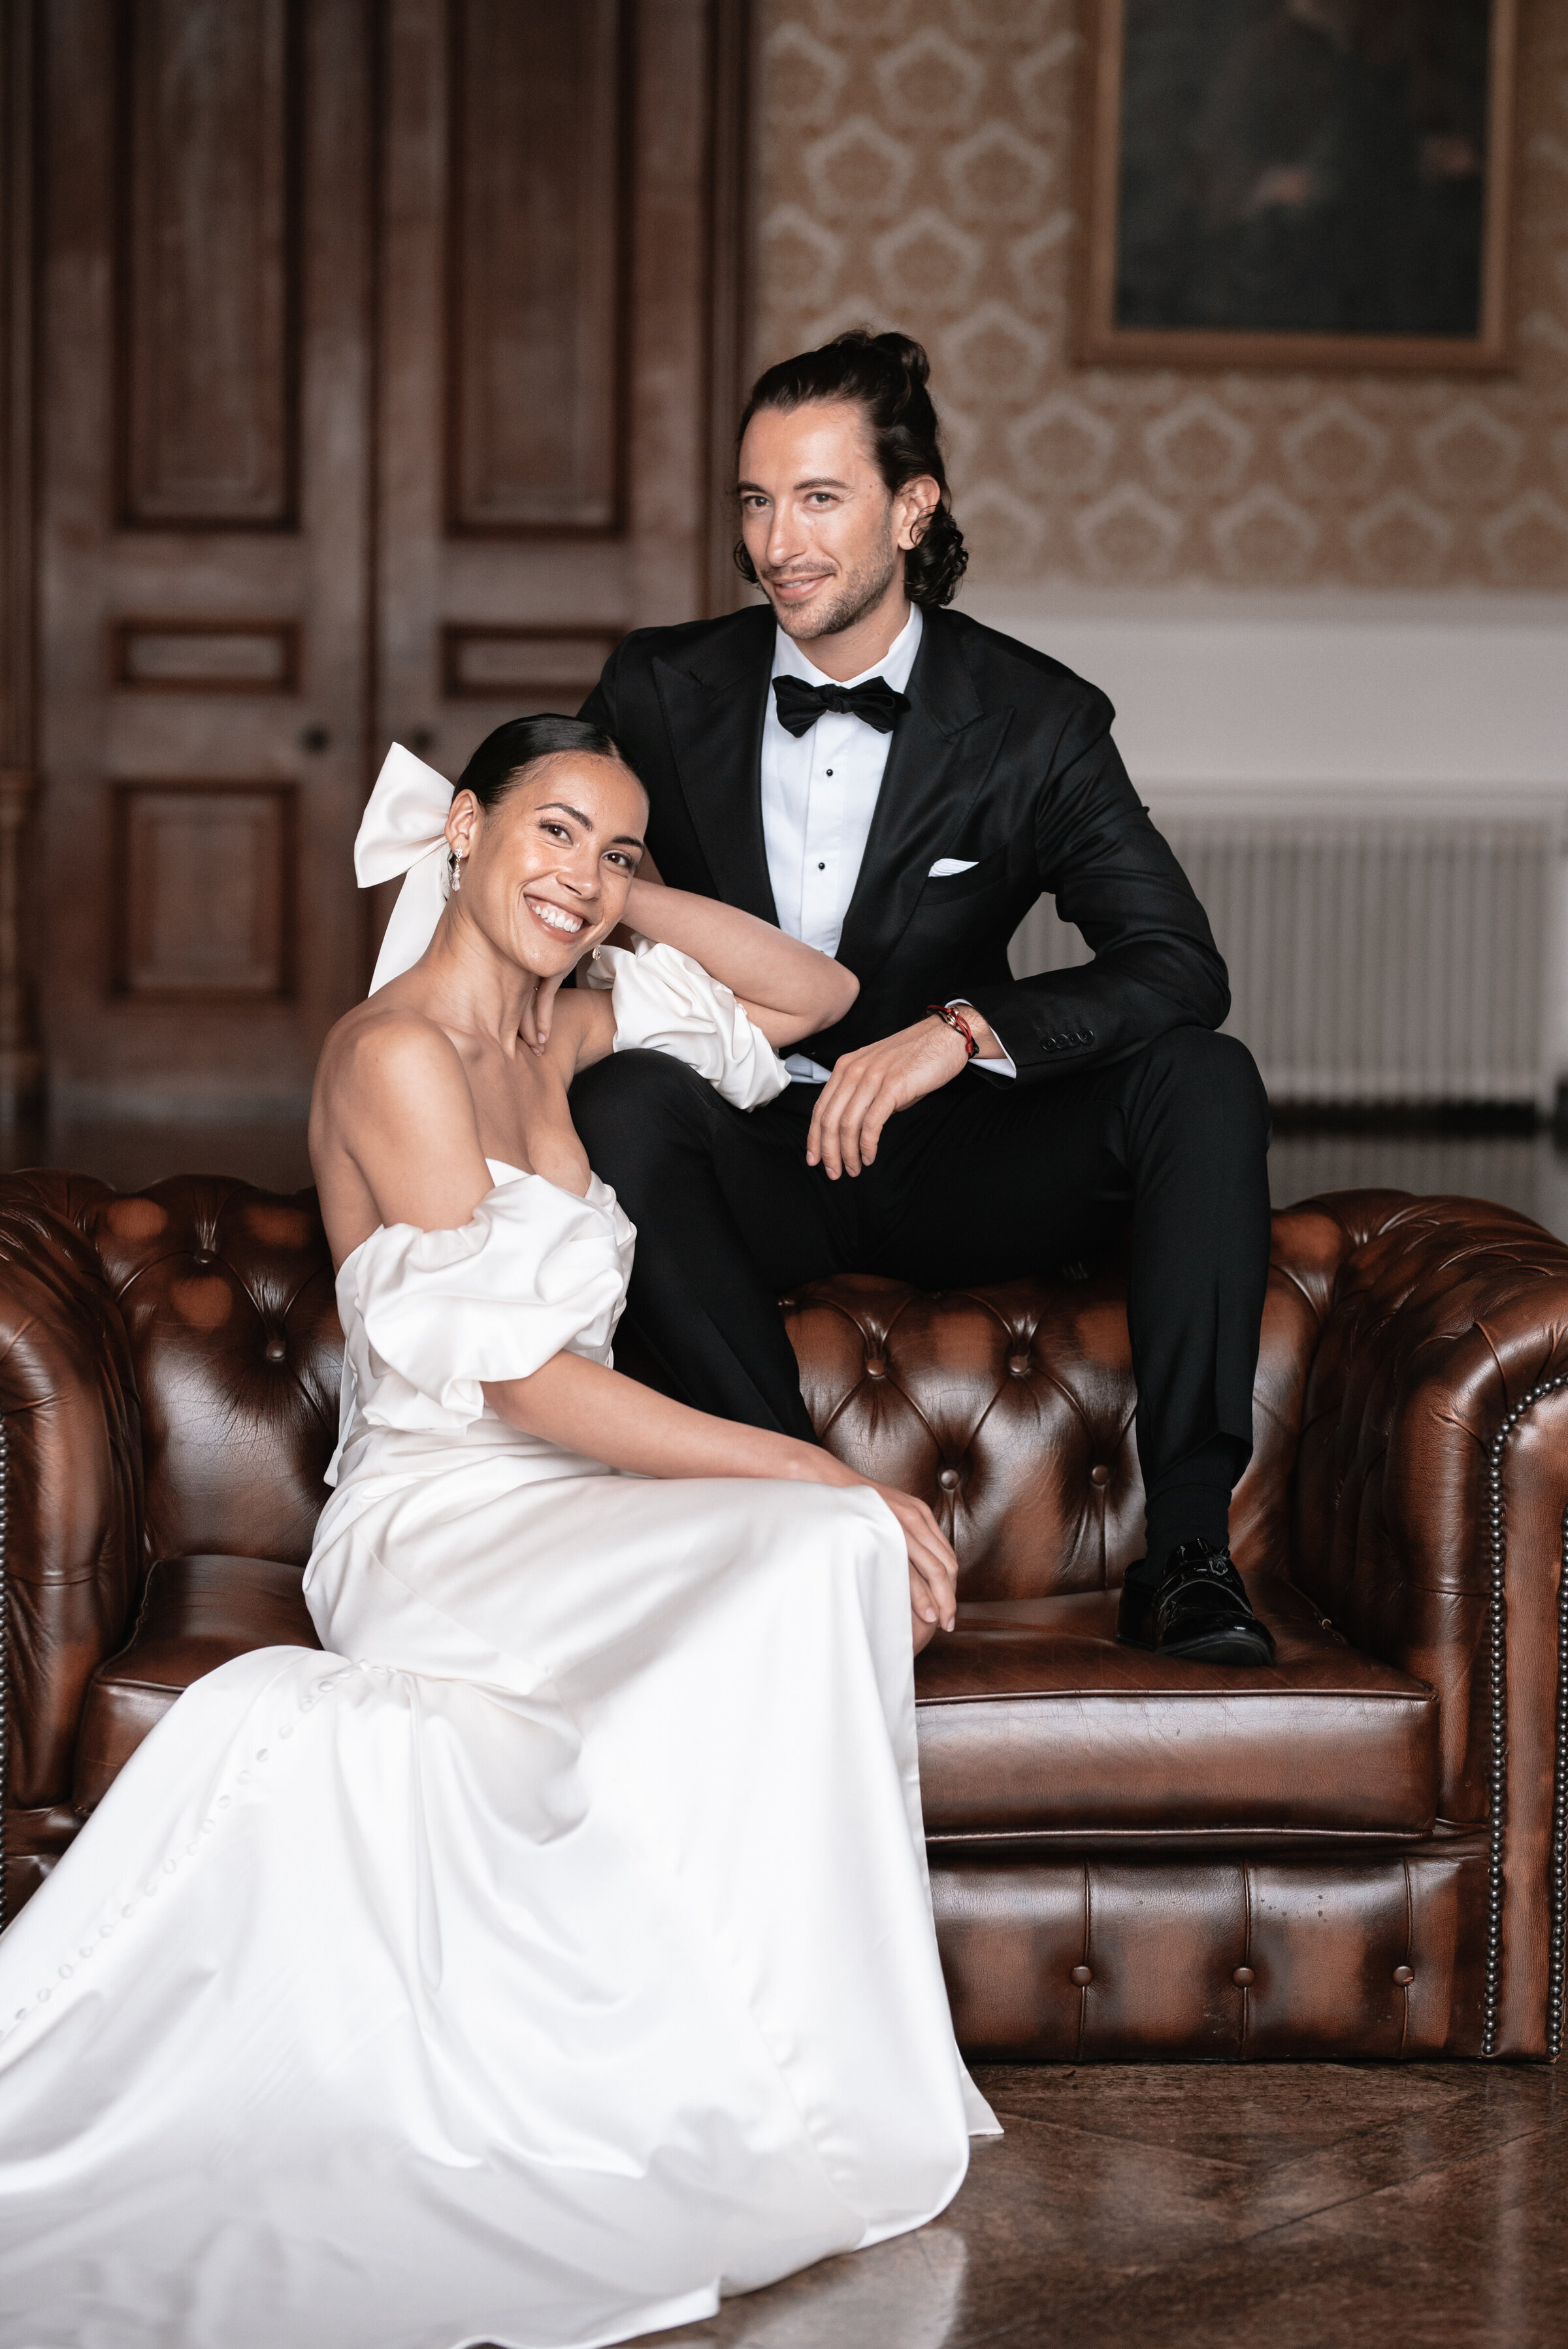 Bride and Groom in wedding attire seated on a leather sofa, smiling directly at the camera